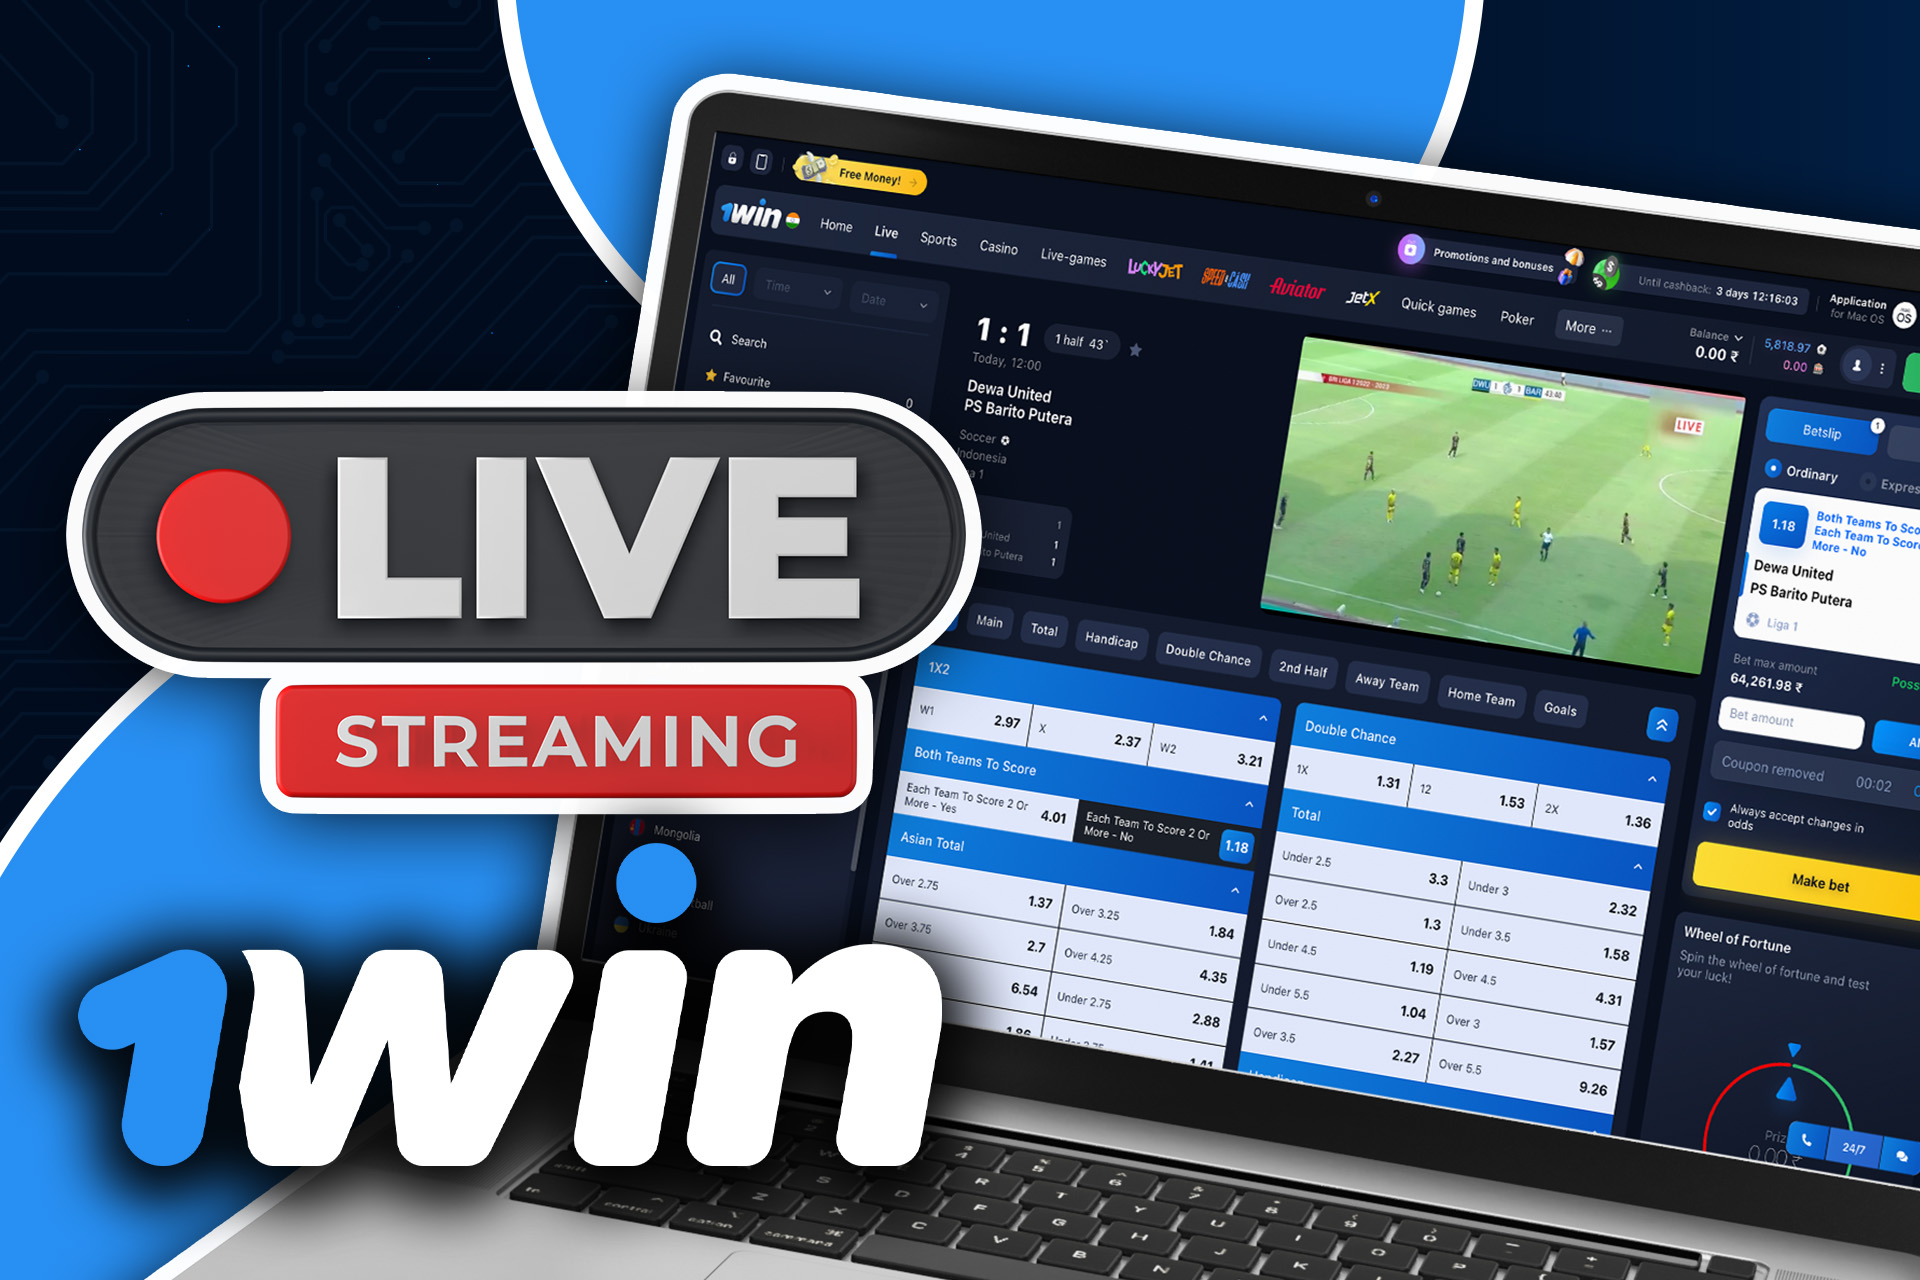 You can watch the matches and place live bets right on the 1win official website.